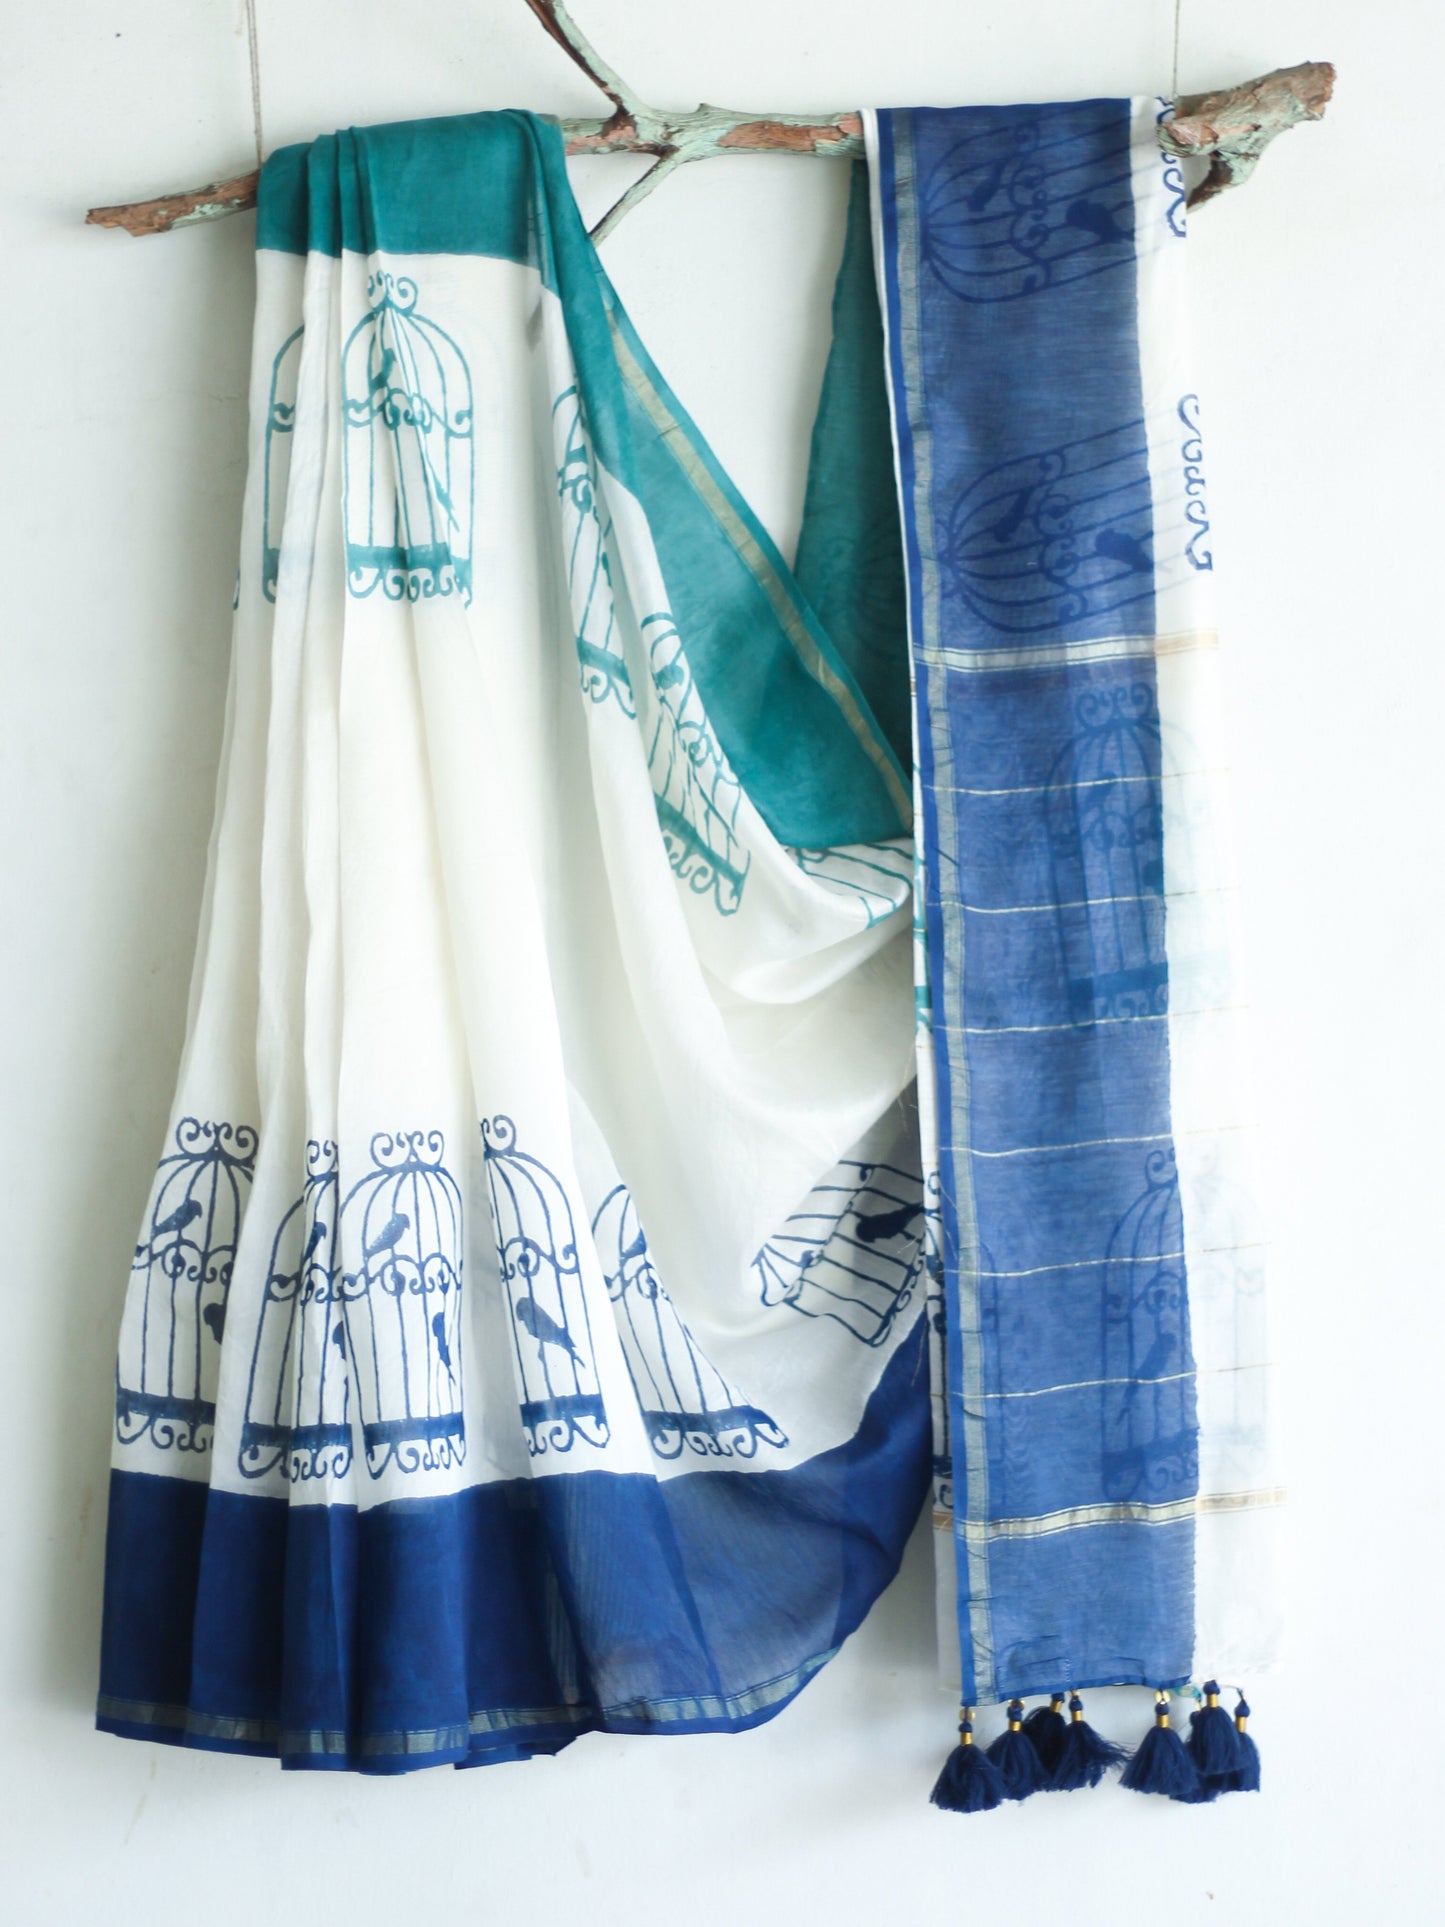 CHANDERI SAREE - Cage with Navy & Teal Blue - CHHAPA